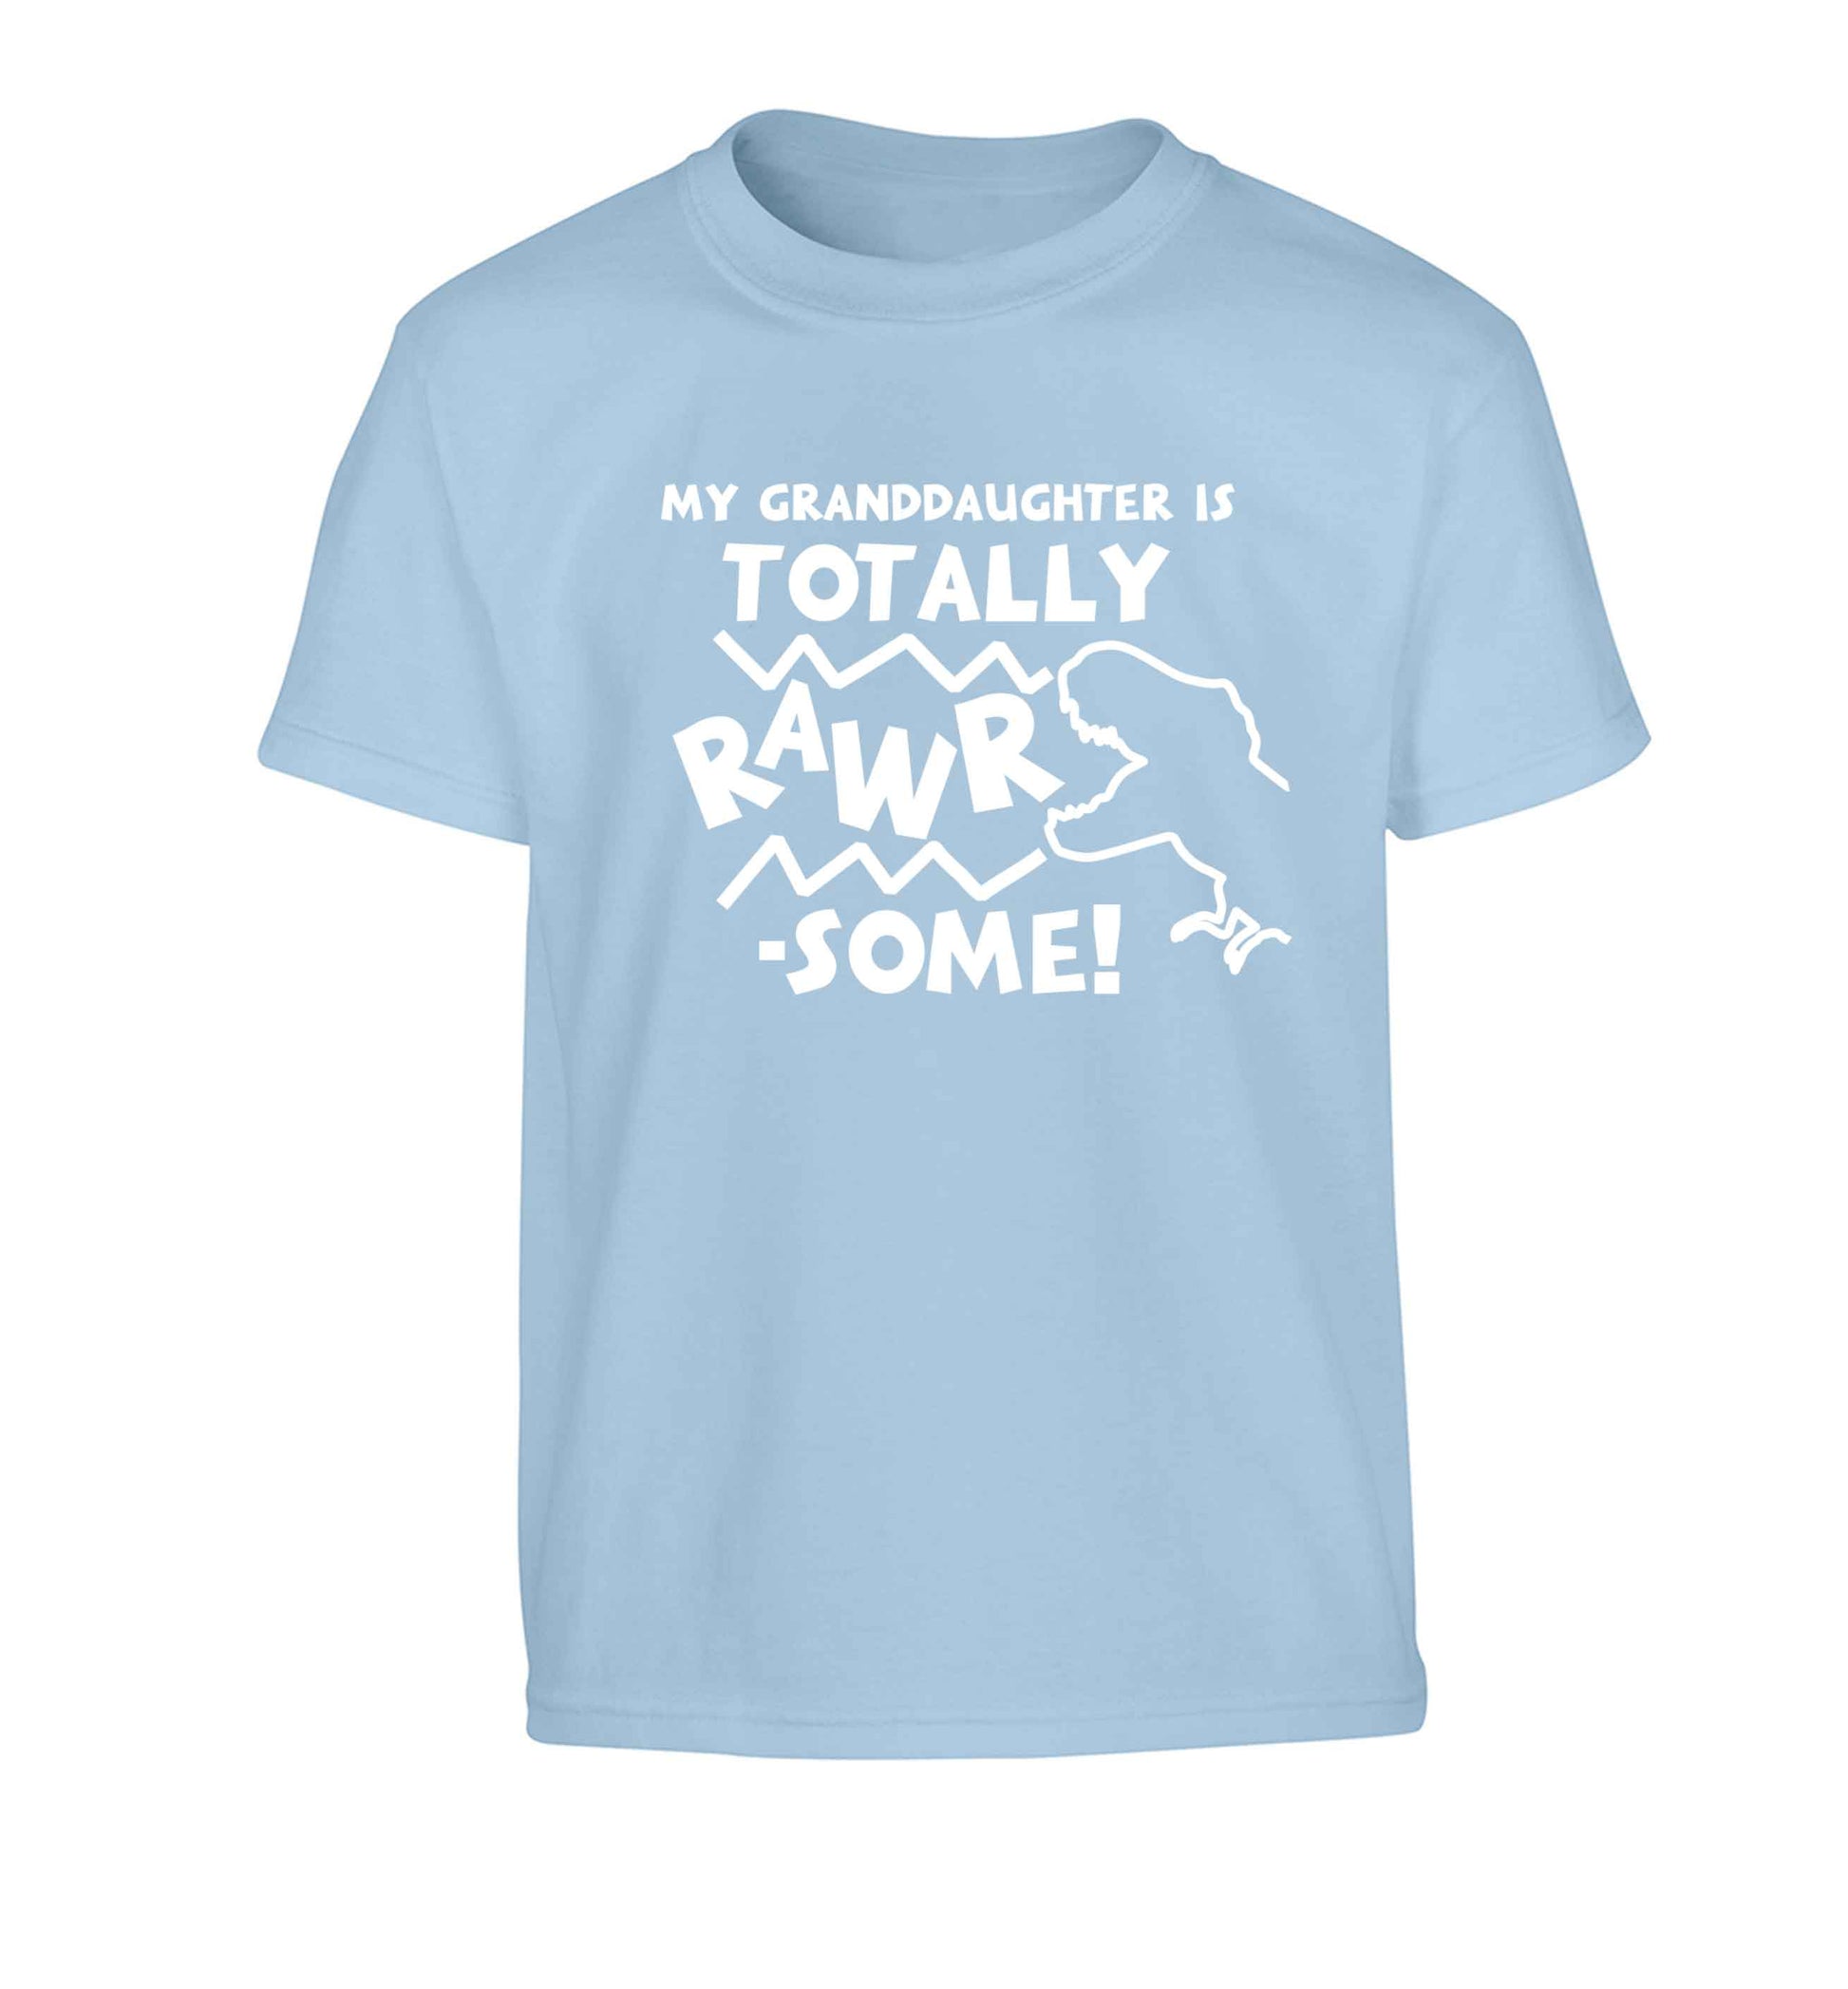 My granddaughter is totally rawrsome Children's light blue Tshirt 12-13 Years